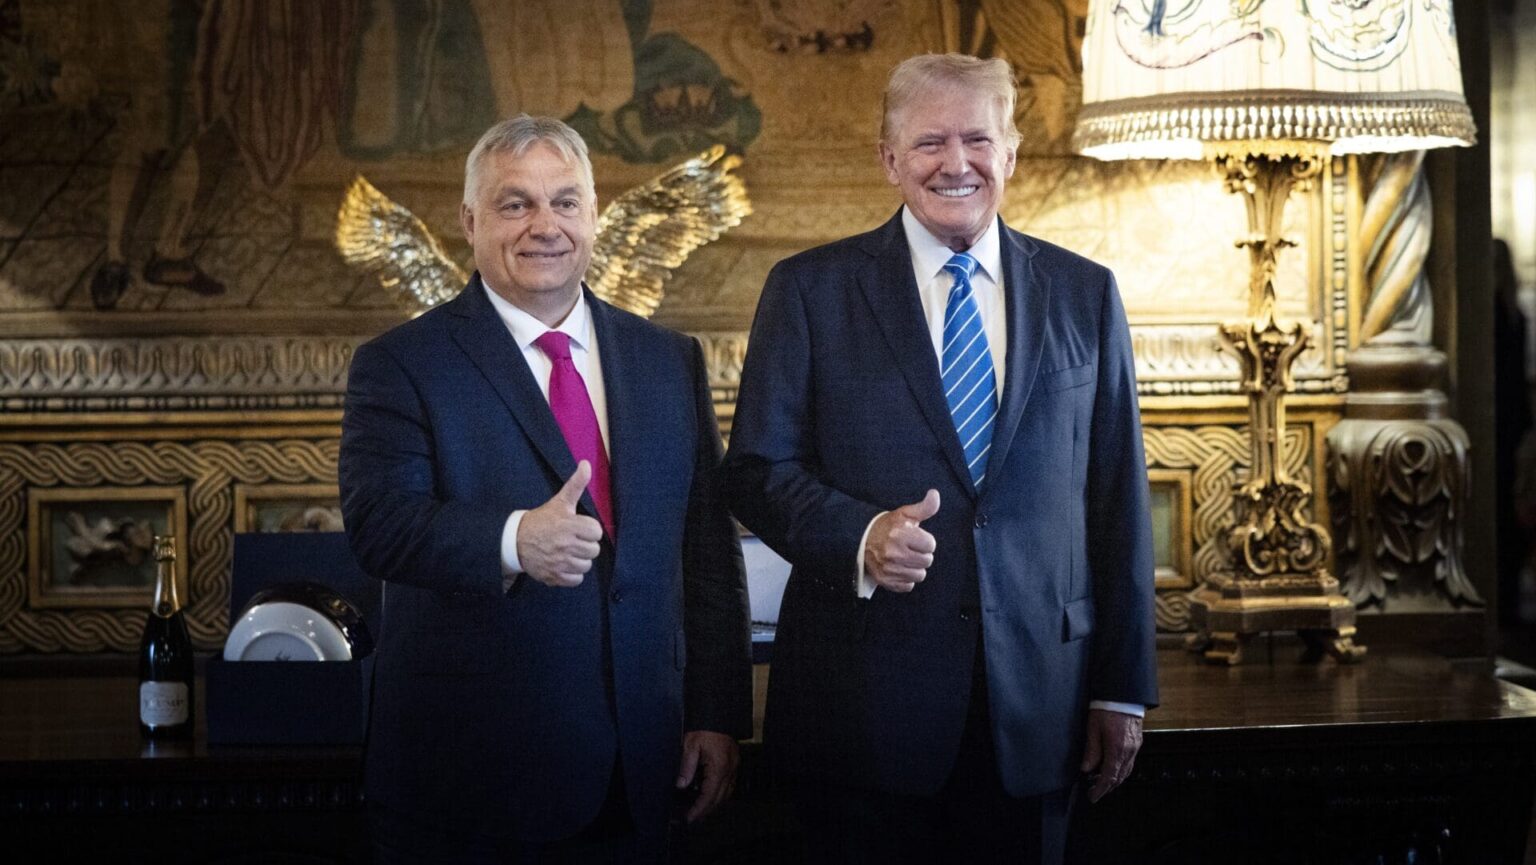 Liberal Hate Comments Wish to See Viktor Orbán Killed After Failed Assassination Attempt on Donald Trump